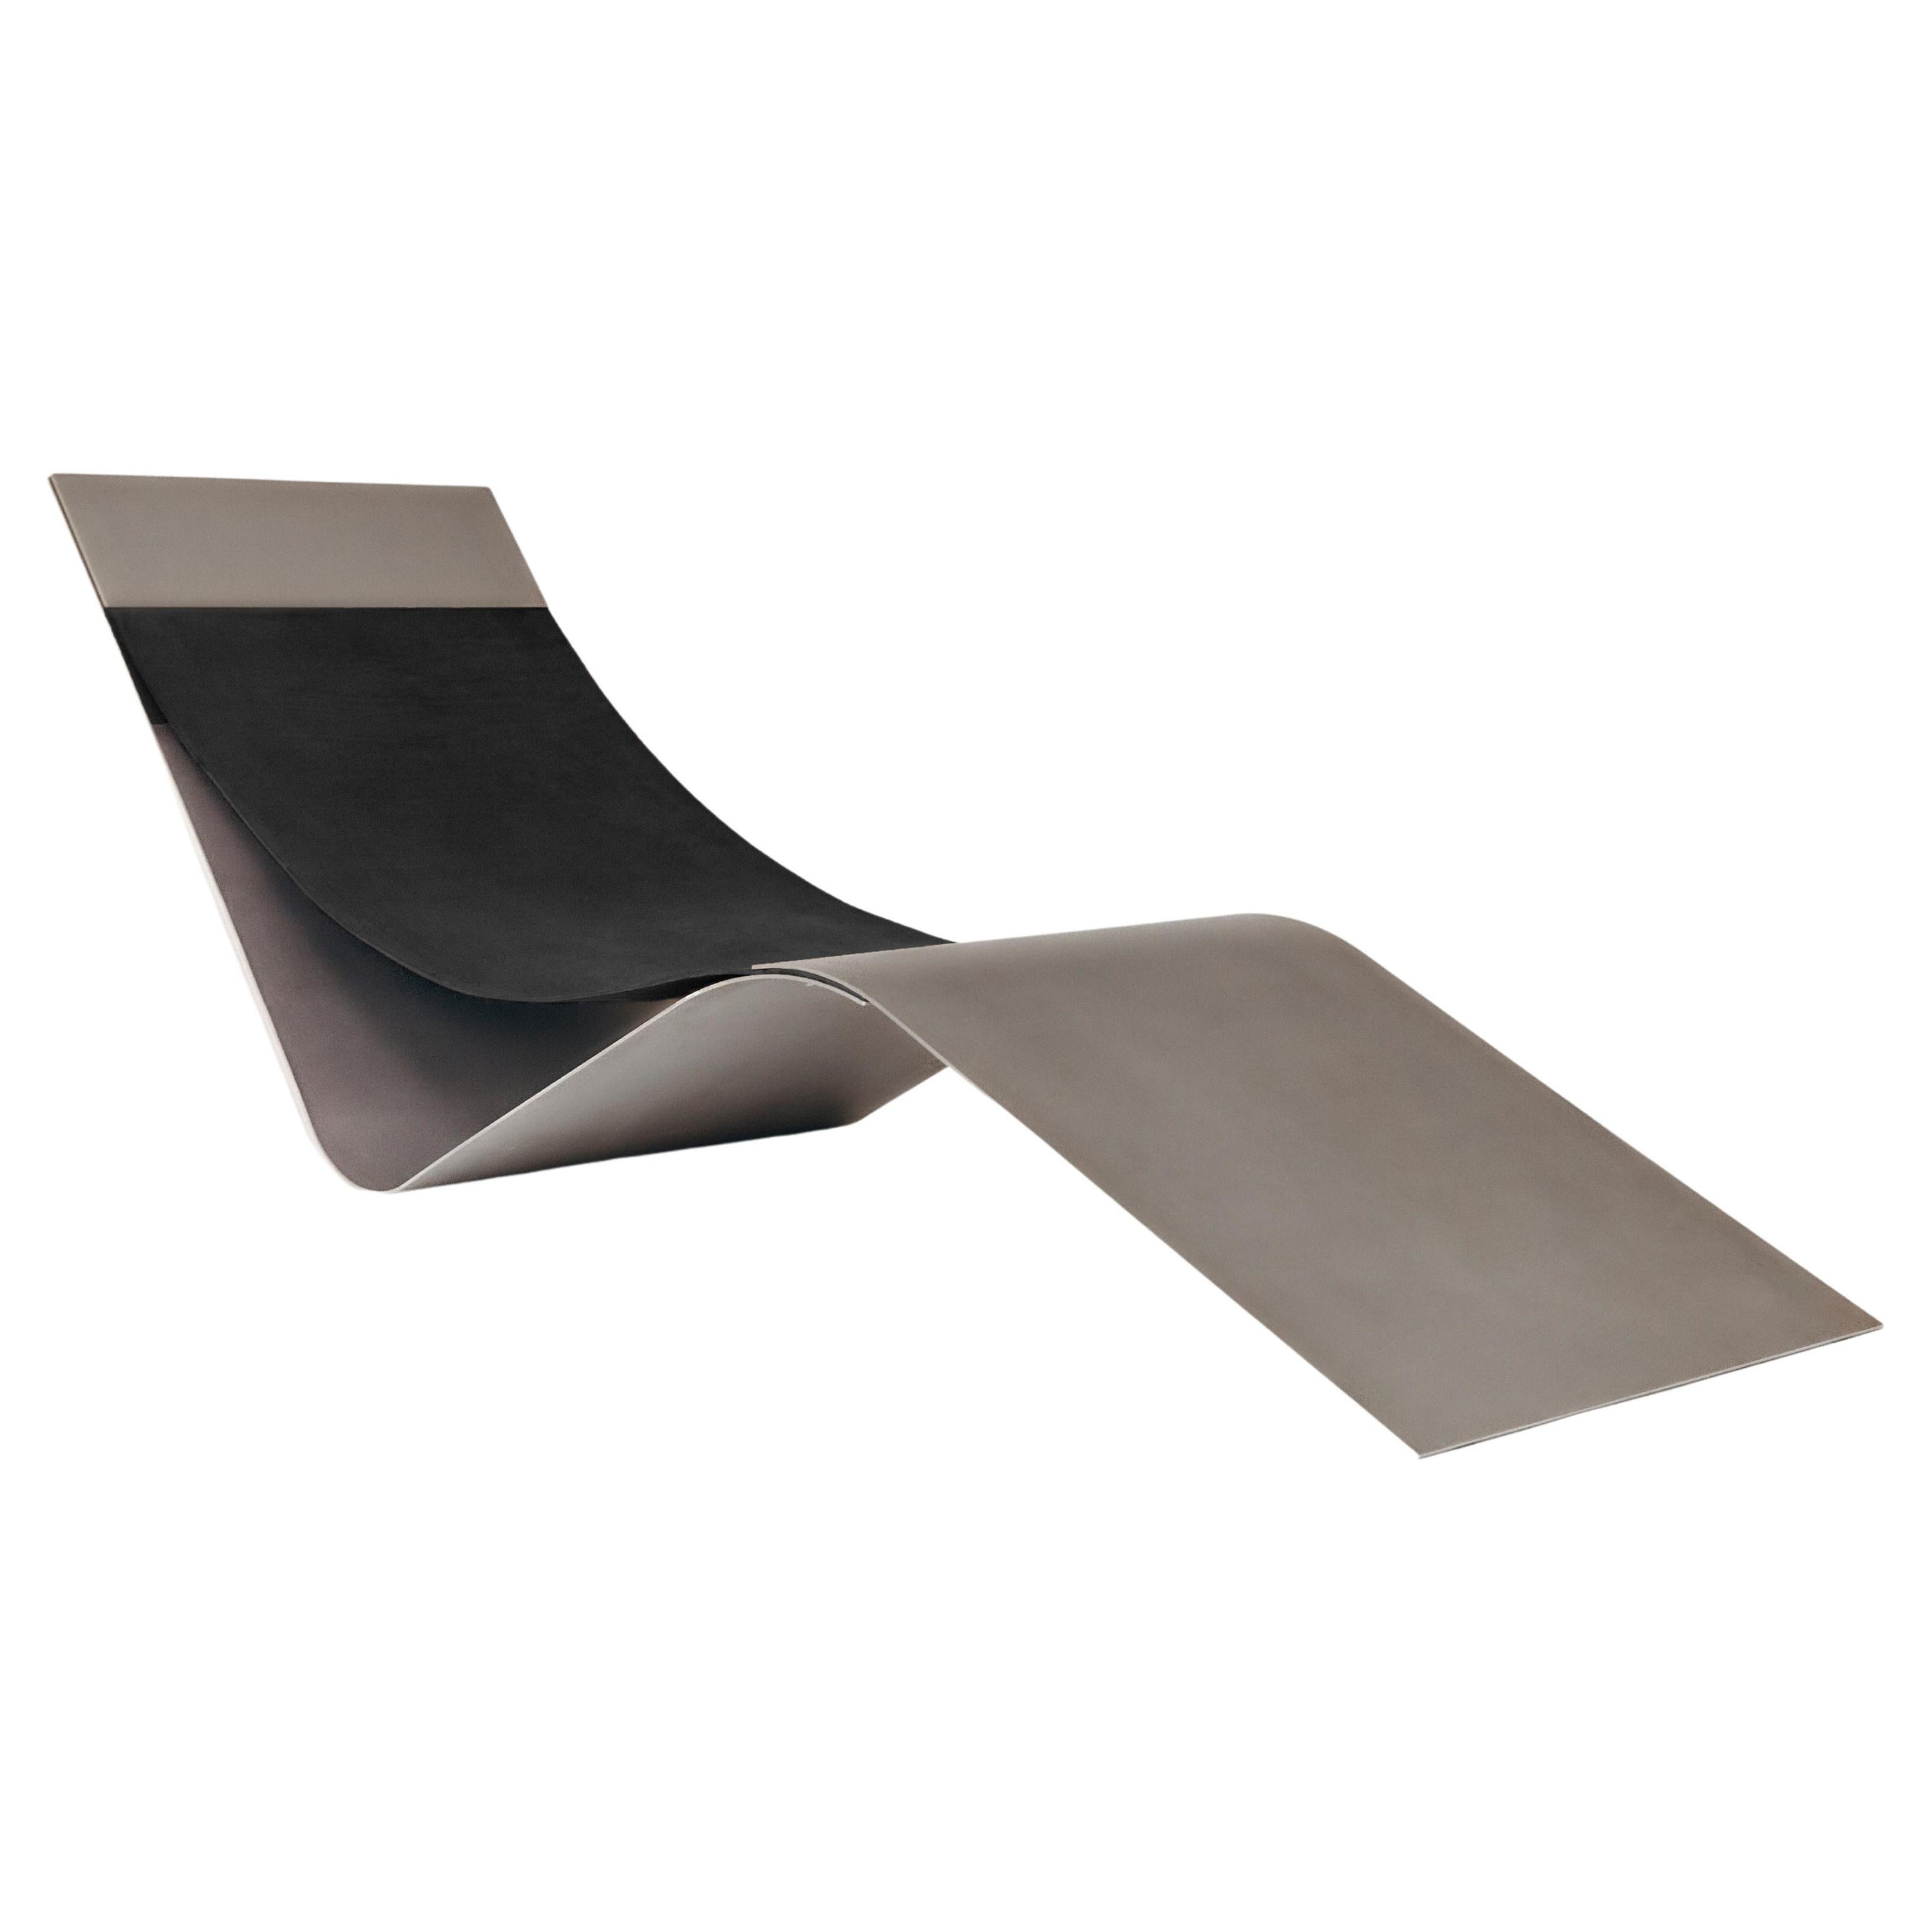 Chaise Longue by Linde Hermans